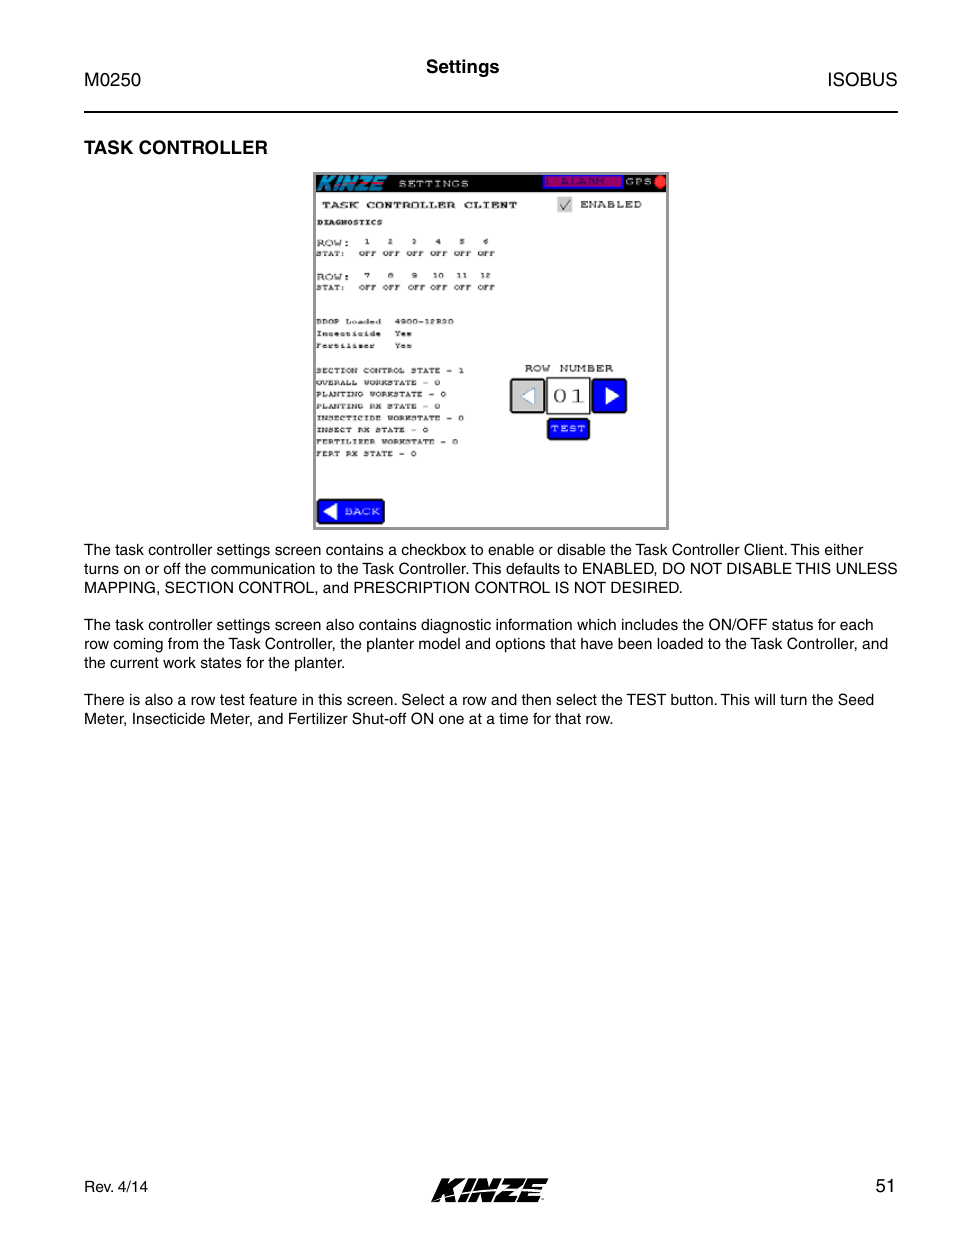 Task controller | Kinze ISOBUS Electronics Package (4900) Rev. 4/14 User Manual | Page 55 / 60